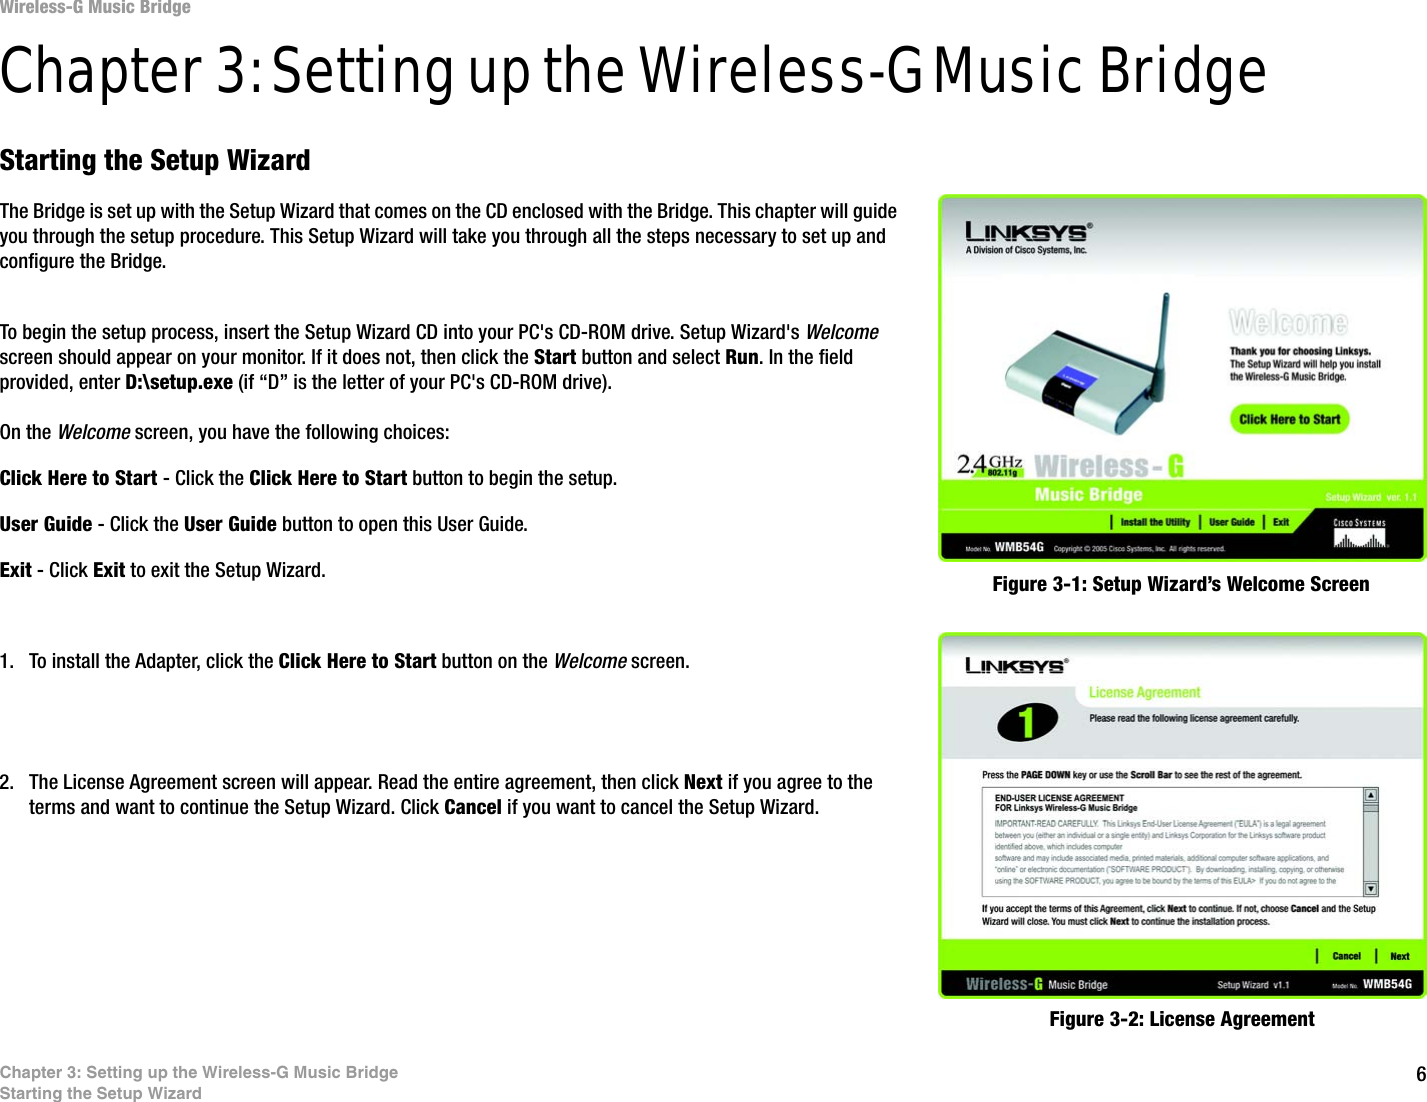 6Chapter 3: Setting up the Wireless-G Music BridgeStarting the Setup WizardWireless-G Music BridgeChapter 3: Setting up the Wireless-G Music BridgeStarting the Setup WizardThe Bridge is set up with the Setup Wizard that comes on the CD enclosed with the Bridge. This chapter will guide you through the setup procedure. This Setup Wizard will take you through all the steps necessary to set up and configure the Bridge.To begin the setup process, insert the Setup Wizard CD into your PC&apos;s CD-ROM drive. Setup Wizard&apos;s Welcome screen should appear on your monitor. If it does not, then click the Start button and select Run. In the field provided, enter D:\setup.exe (if “D” is the letter of your PC&apos;s CD-ROM drive). On the Welcome screen, you have the following choices:Click Here to Start - Click the Click Here to Start button to begin the setup. User Guide - Click the User Guide button to open this User Guide. Exit - Click Exit to exit the Setup Wizard.1. To install the Adapter, click the Click Here to Start button on the Welcome screen.2. The License Agreement screen will appear. Read the entire agreement, then click Next if you agree to the terms and want to continue the Setup Wizard. Click Cancel if you want to cancel the Setup Wizard.Figure 3-1: Setup Wizard’s Welcome ScreenFigure 3-2: License Agreement